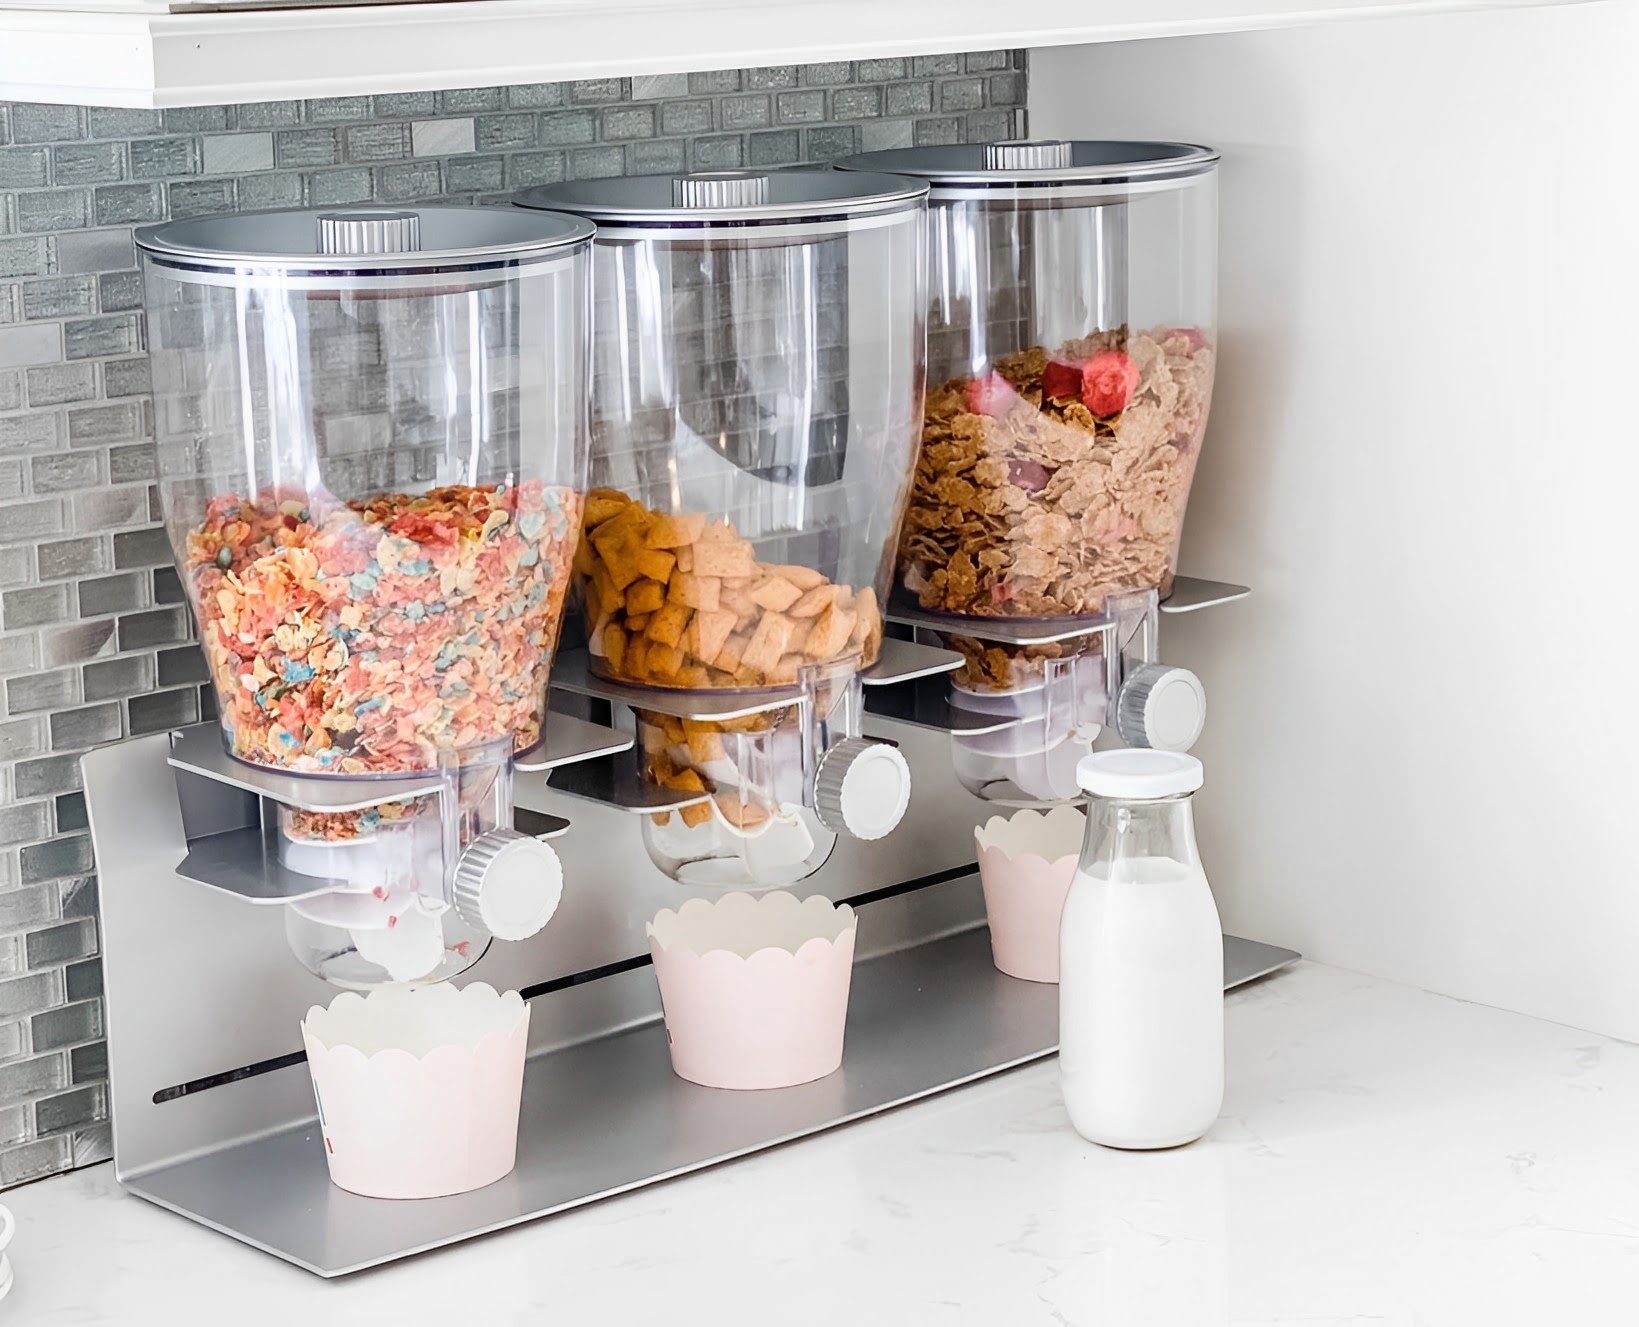 How To Store Cereal For Long Term Storage